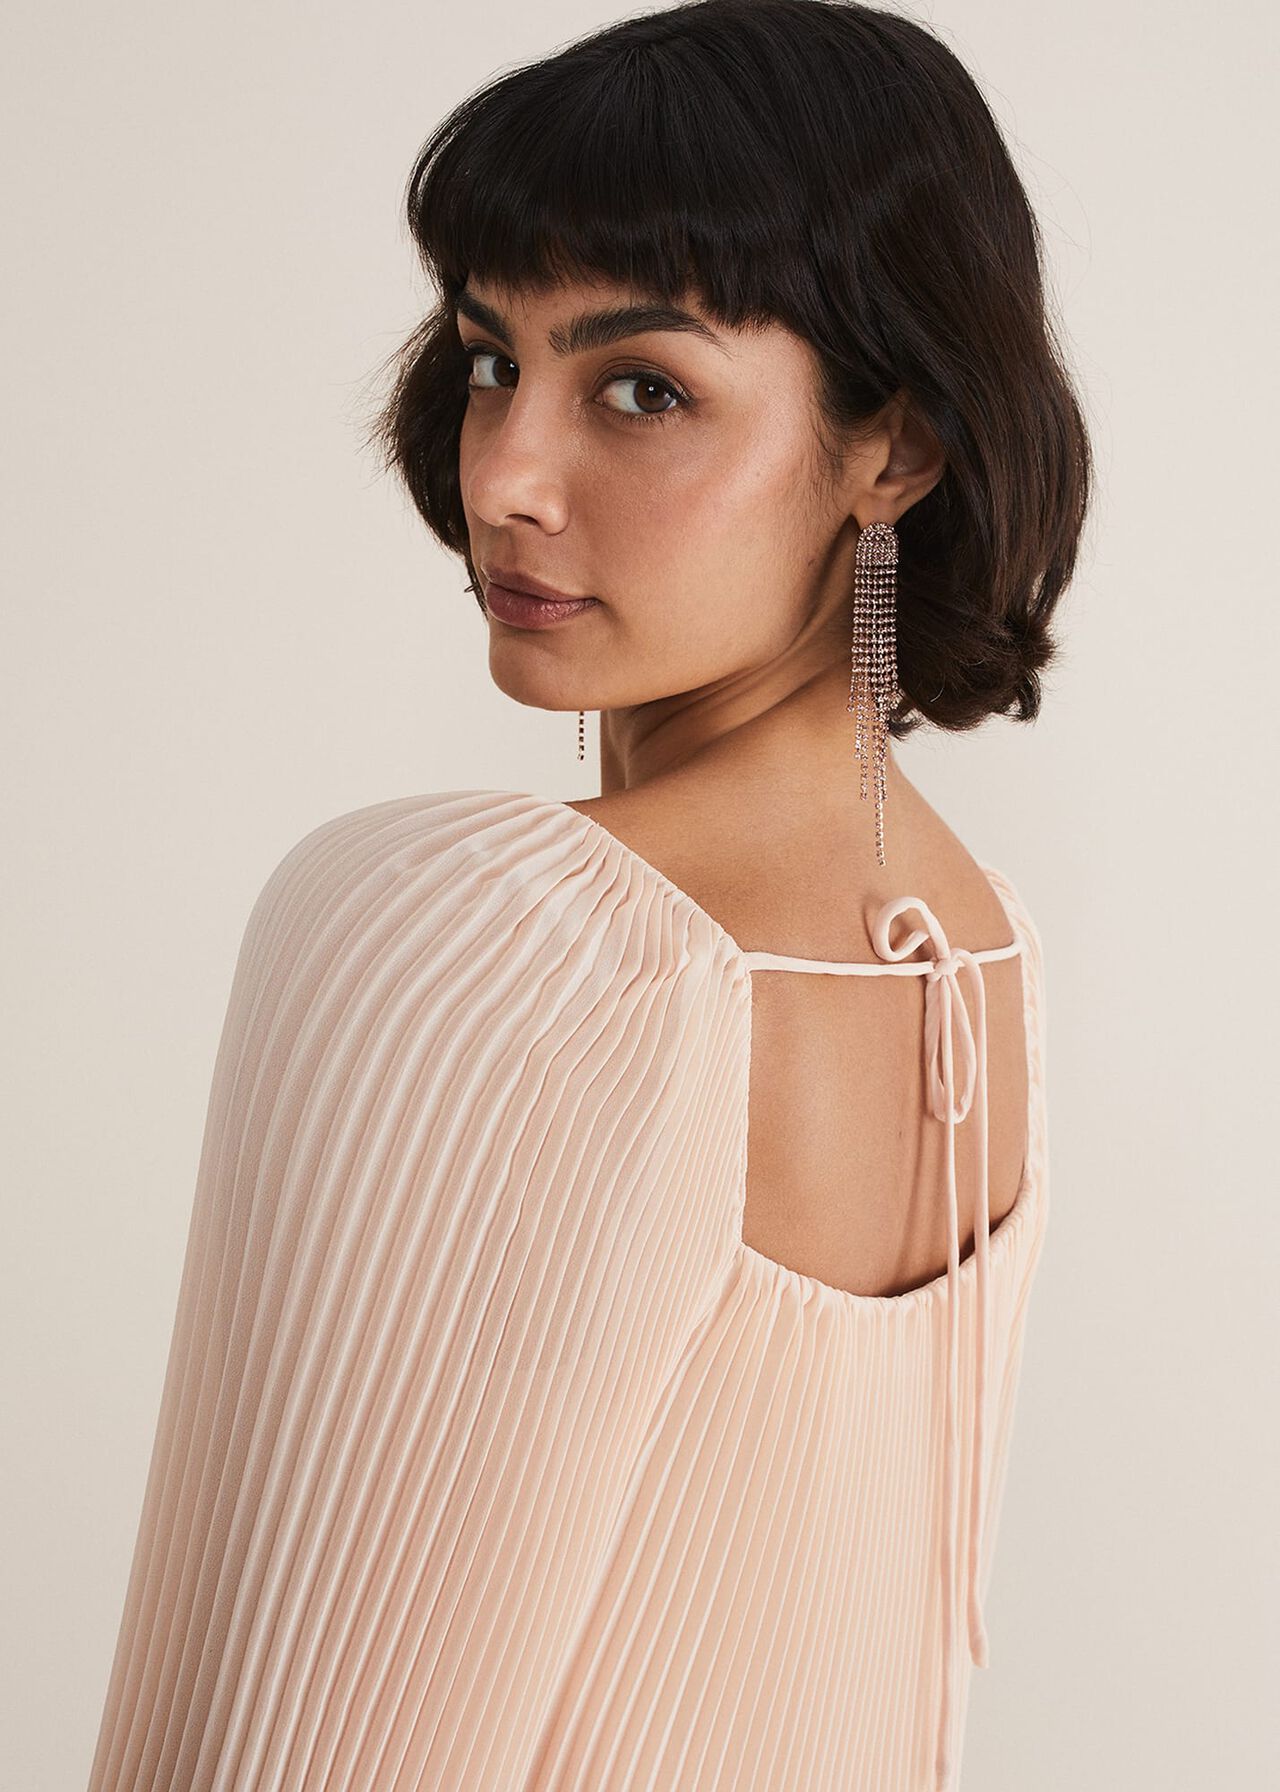 Nysa Pleated Top